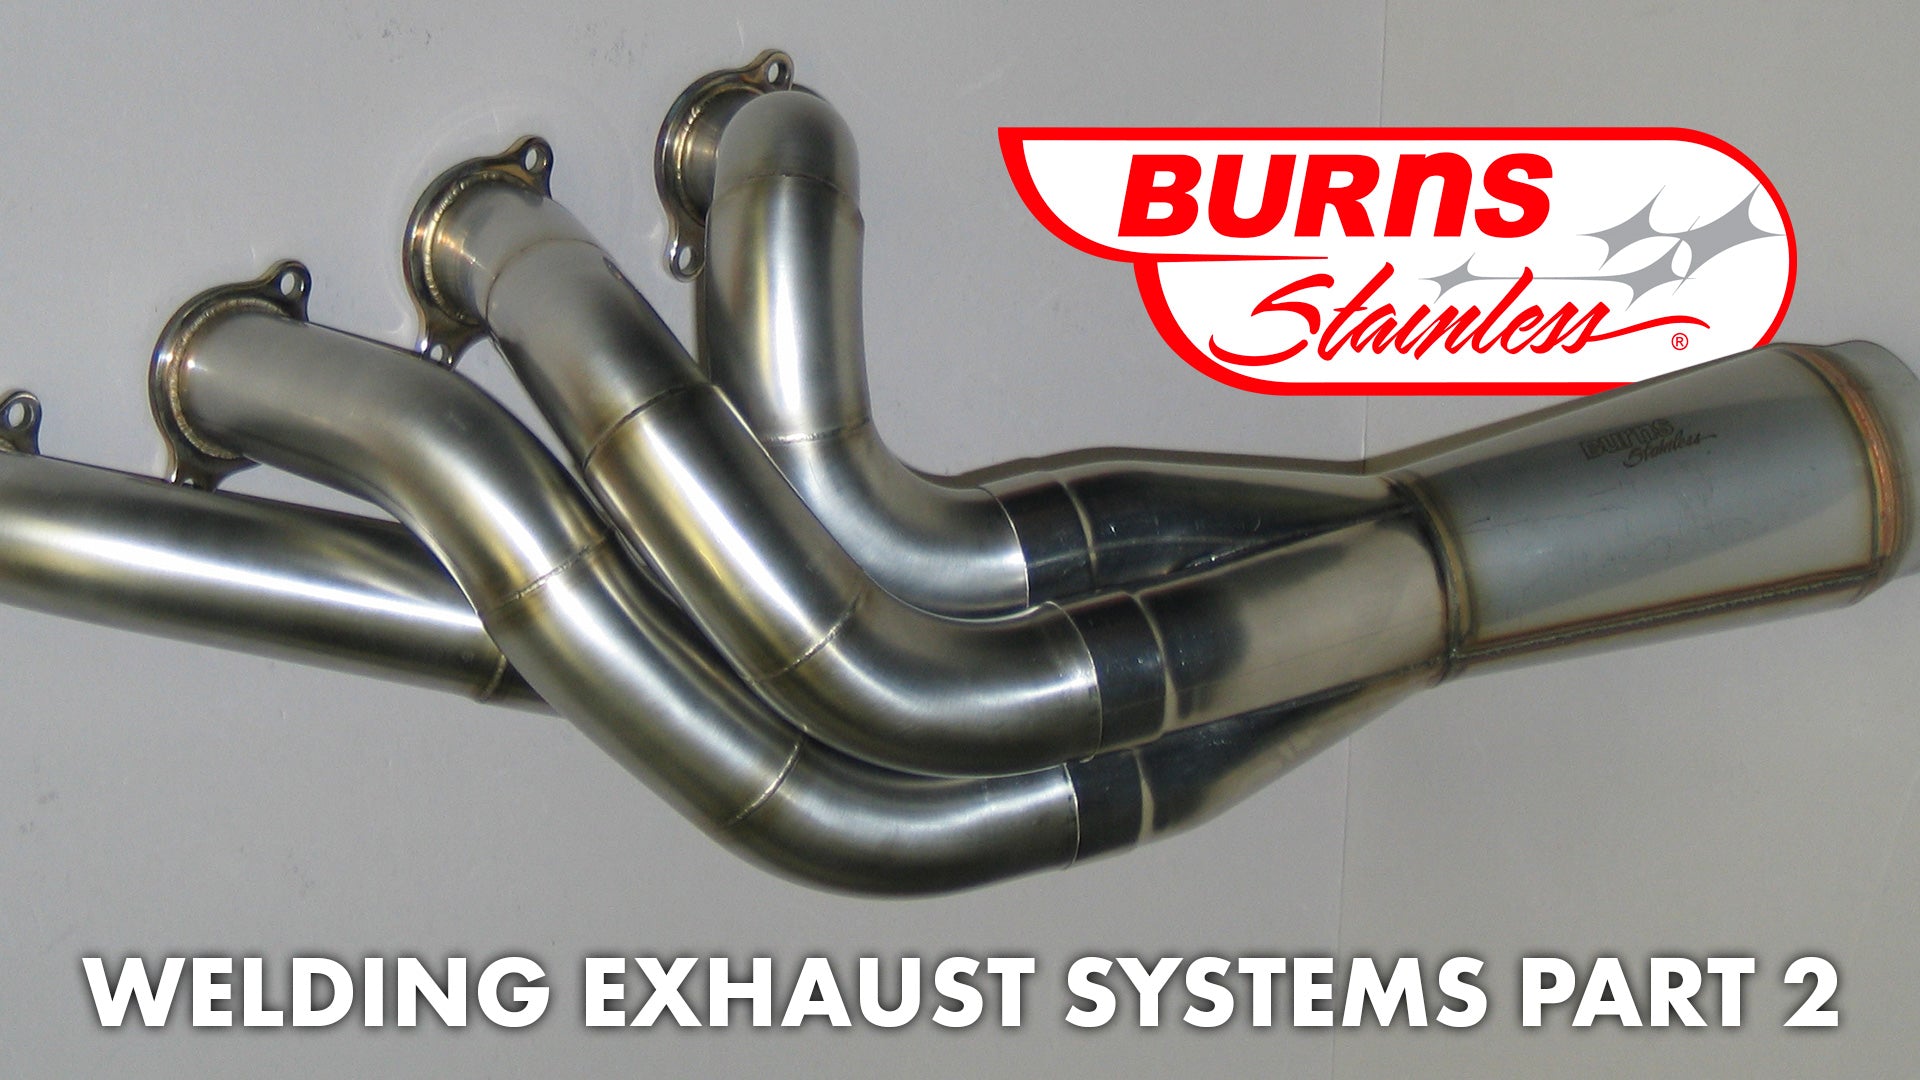 Welding Exhaust Systems - Part 2